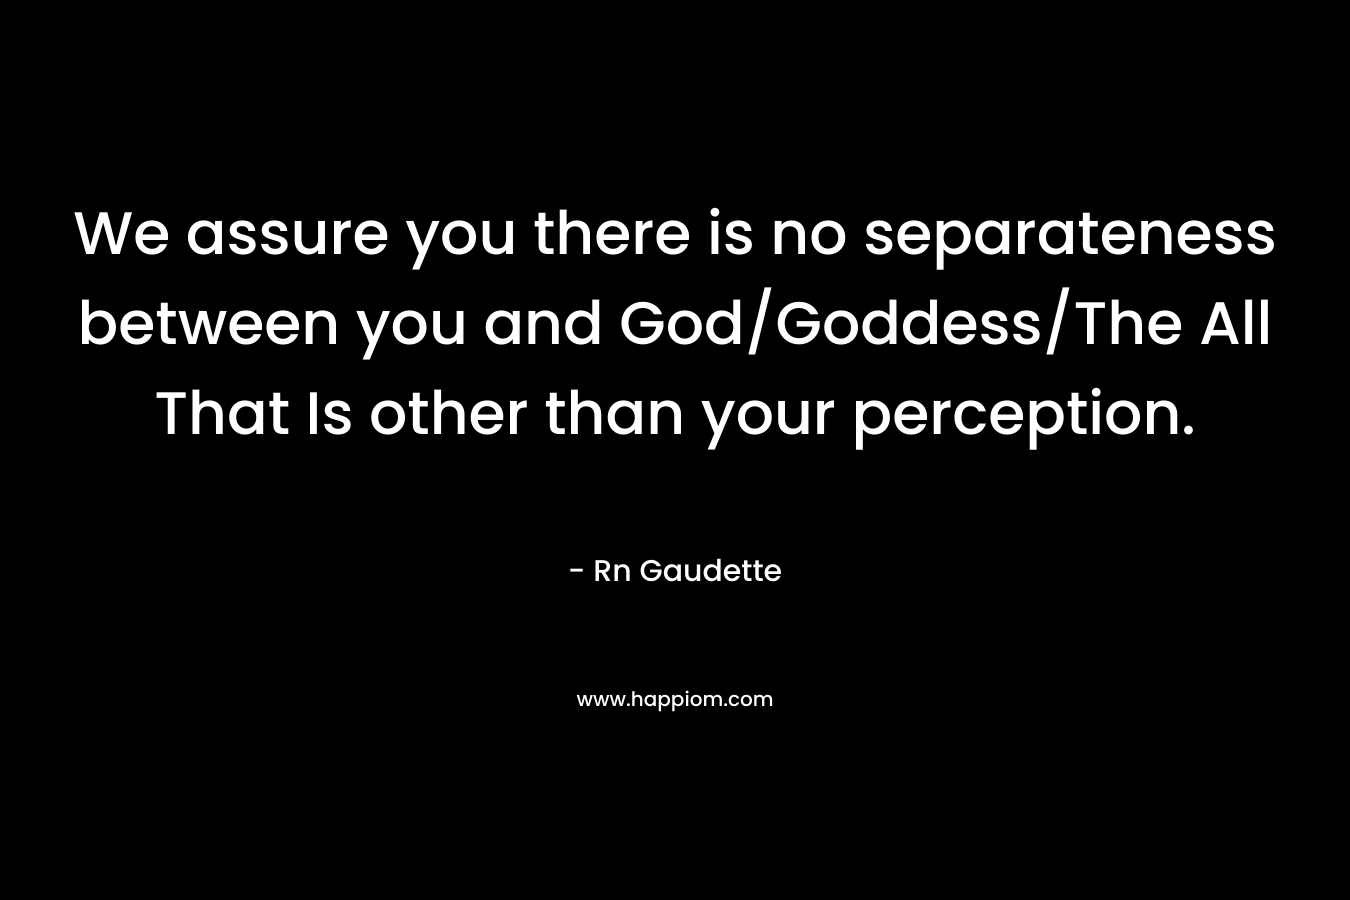 We assure you there is no separateness between you and God/Goddess/The All That Is other than your perception. – Rn Gaudette